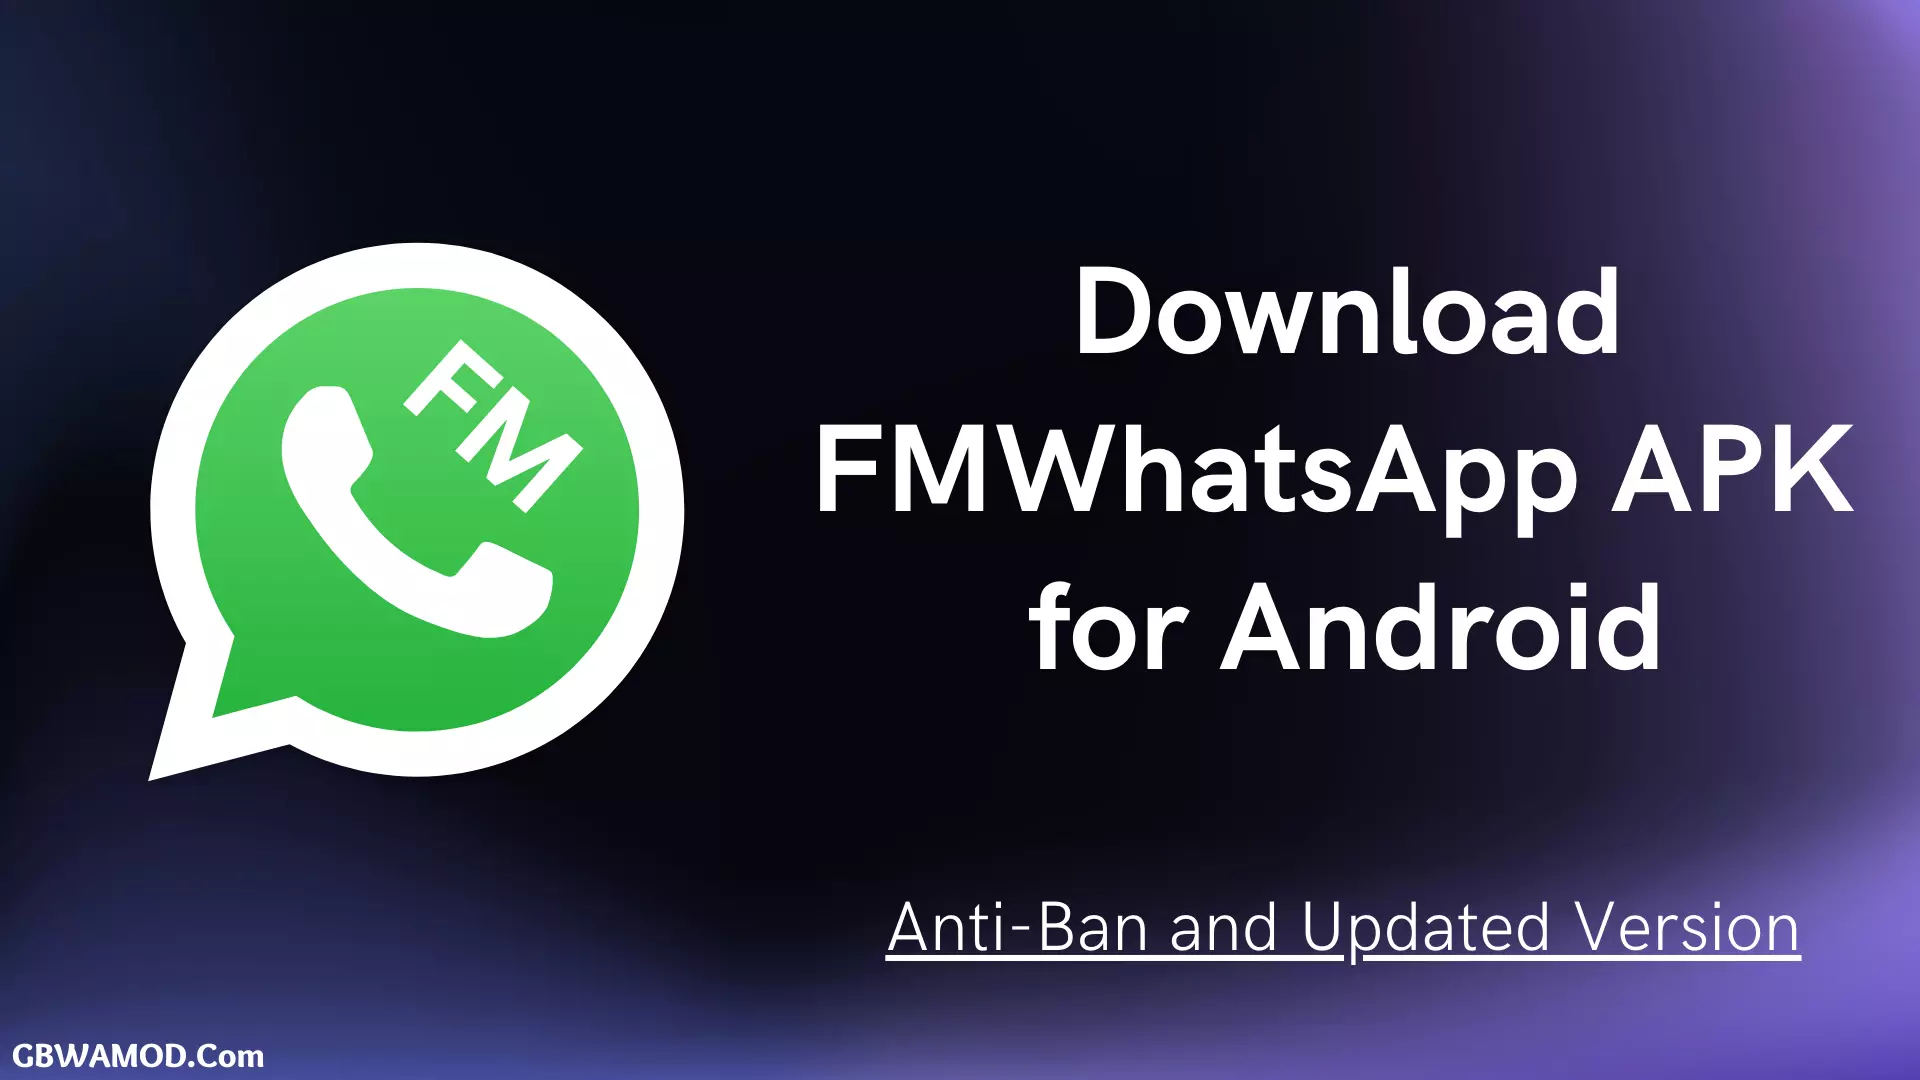 Download FMWhatsApp from here